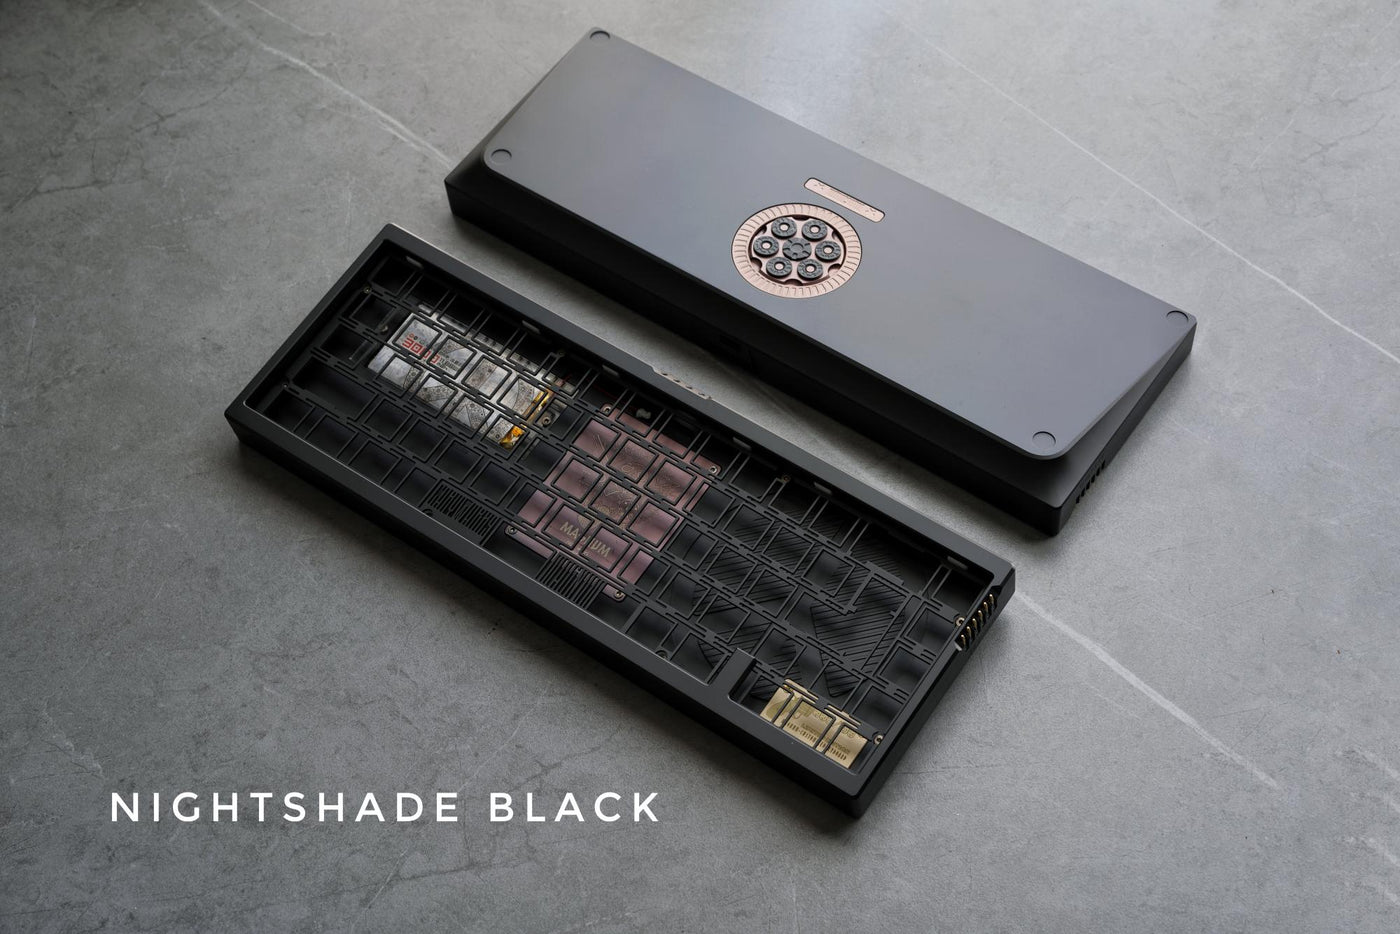 [Group Buy] Cary Works Magnum65 Mechanical Keyboard Kit